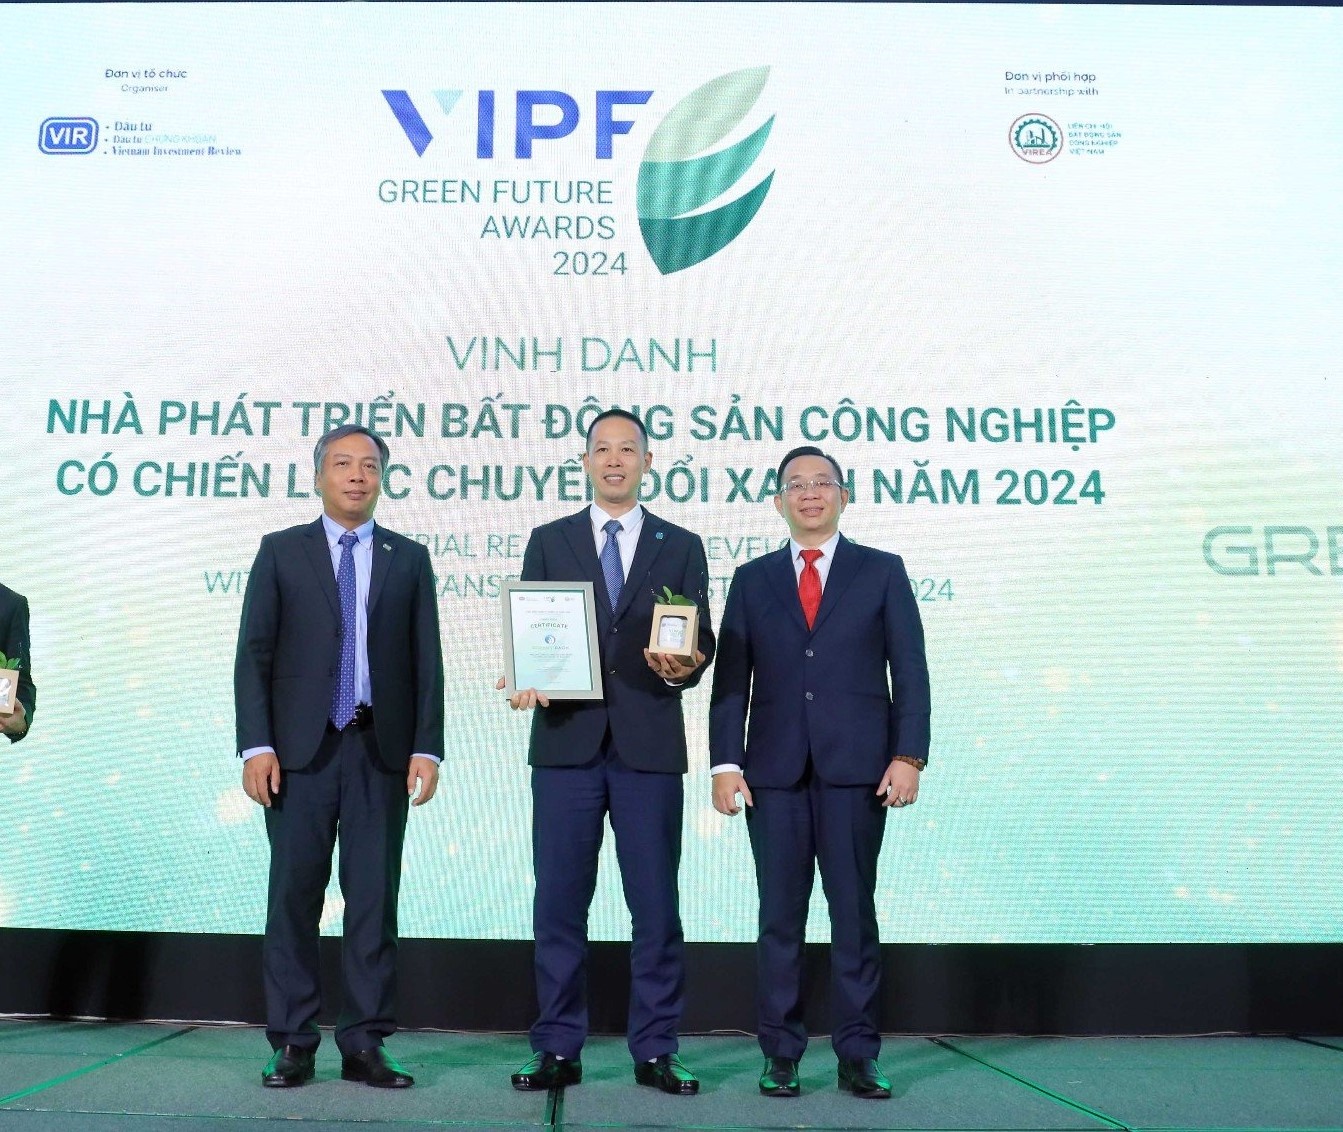 green i park honoured for its green transformation strategies